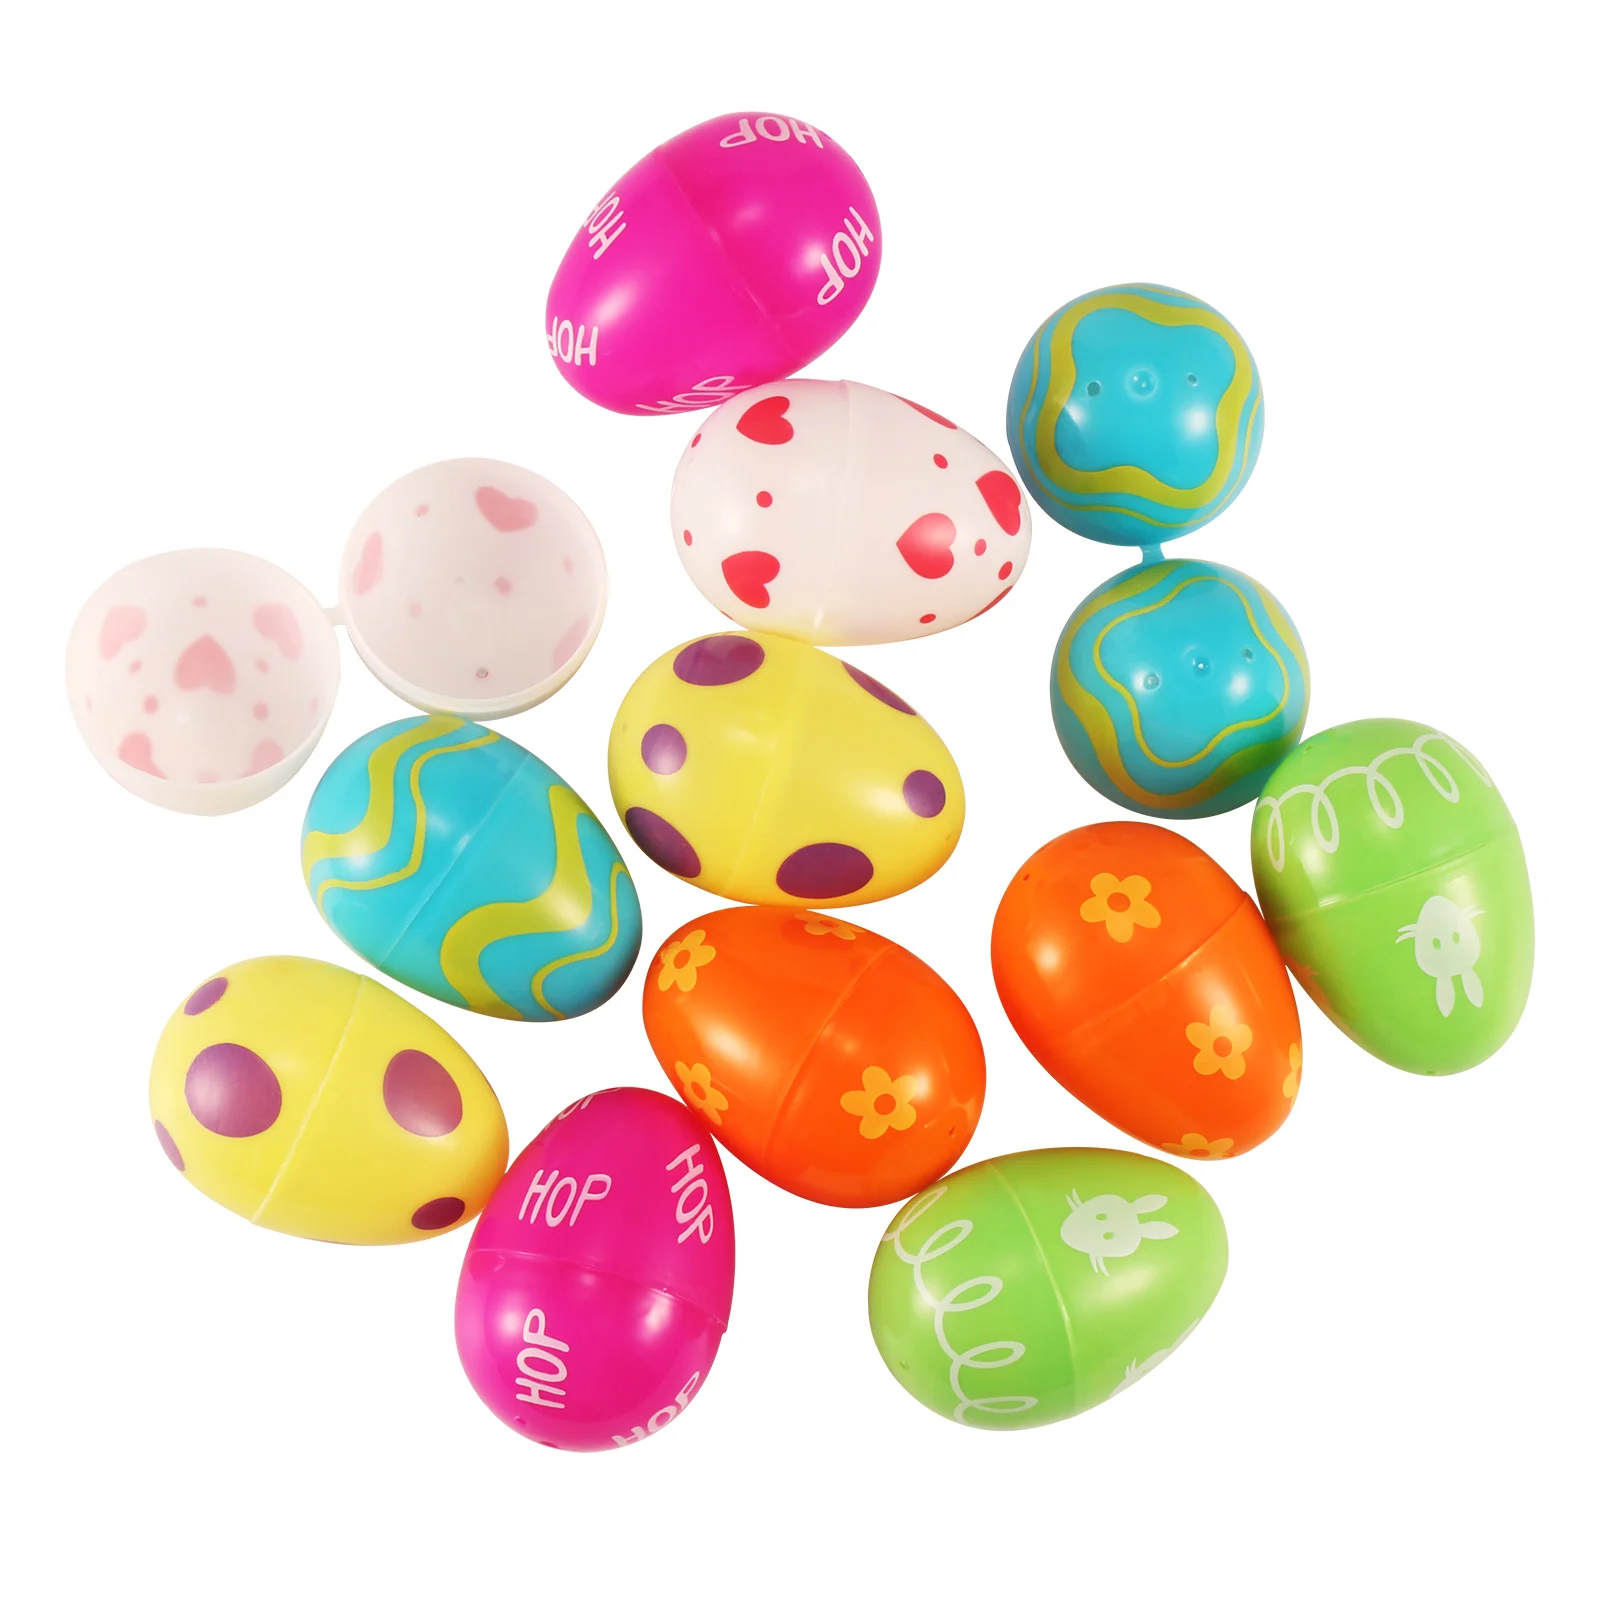 12pcs Colourful Easter Egg Kid Printed Pastel Plastic Assorted Eggs Hunt Party Children Child DIY Educational Toys Fun Kid Gifts